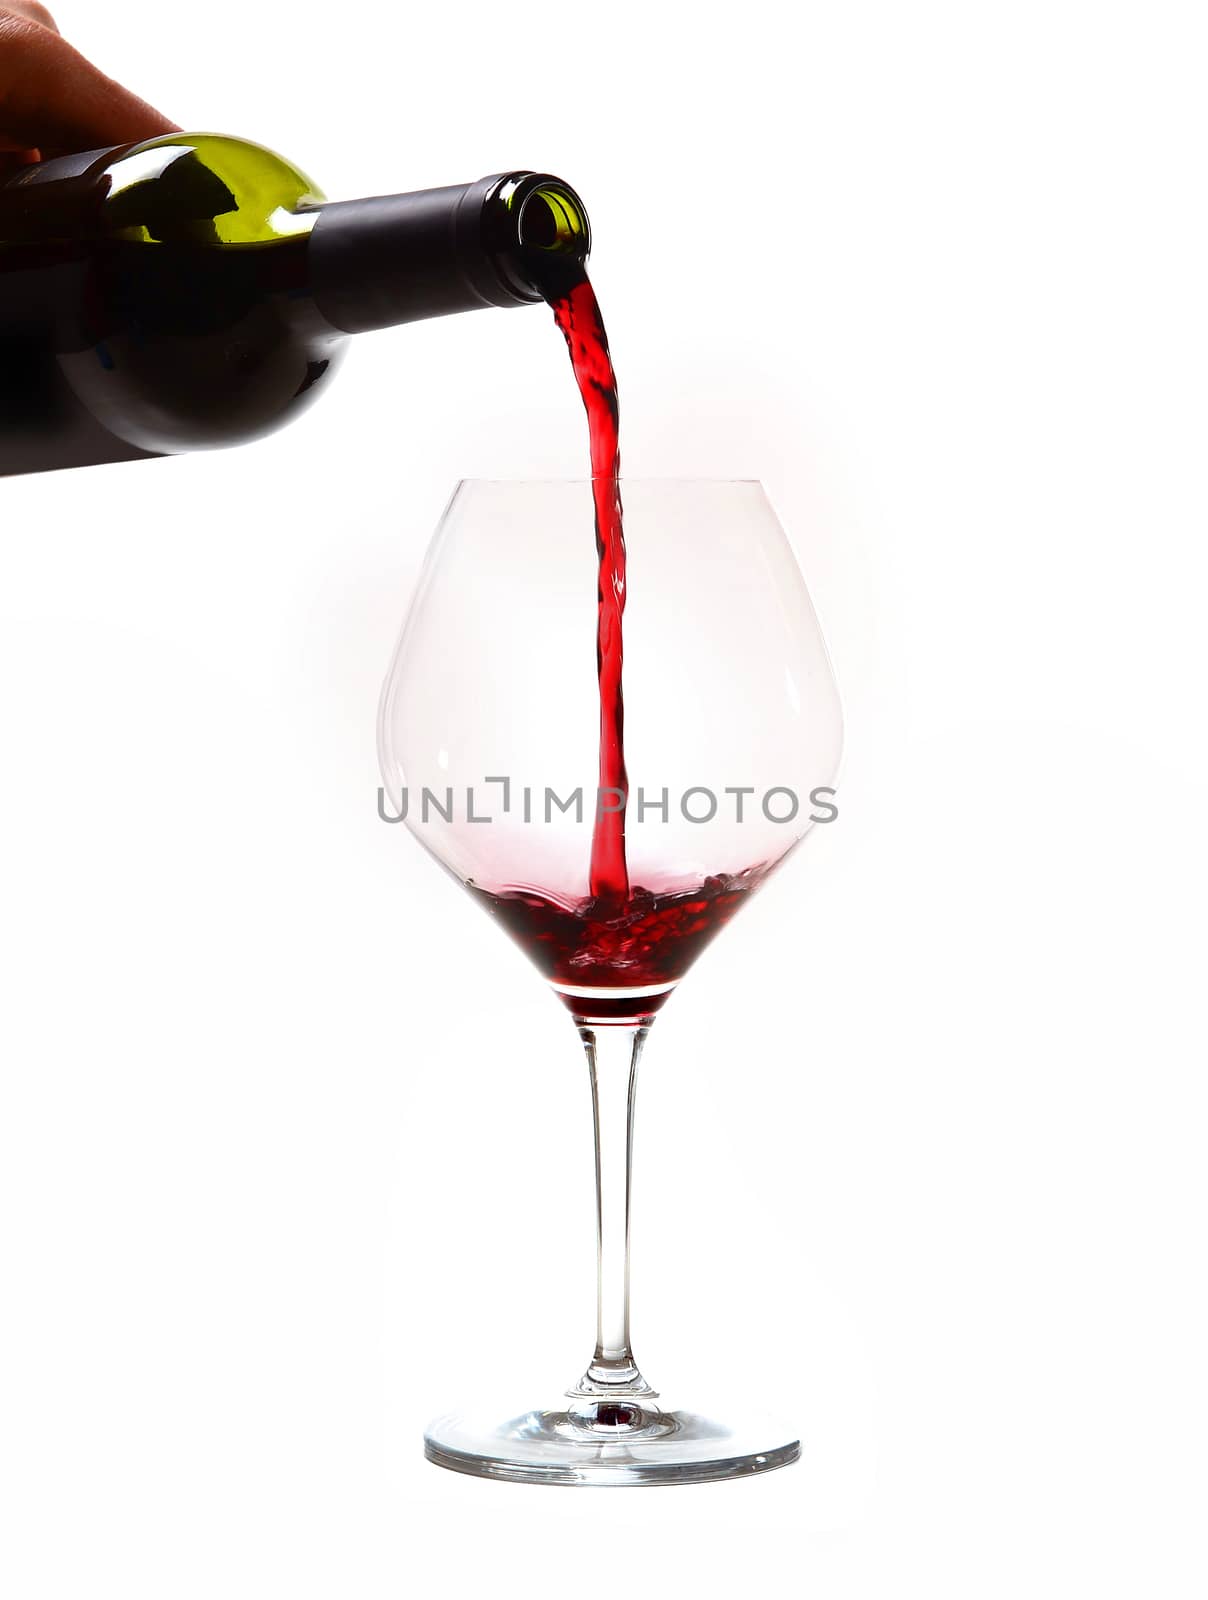 Man Hand holding Bottle filling Glass with Red Wine isolated on white background 